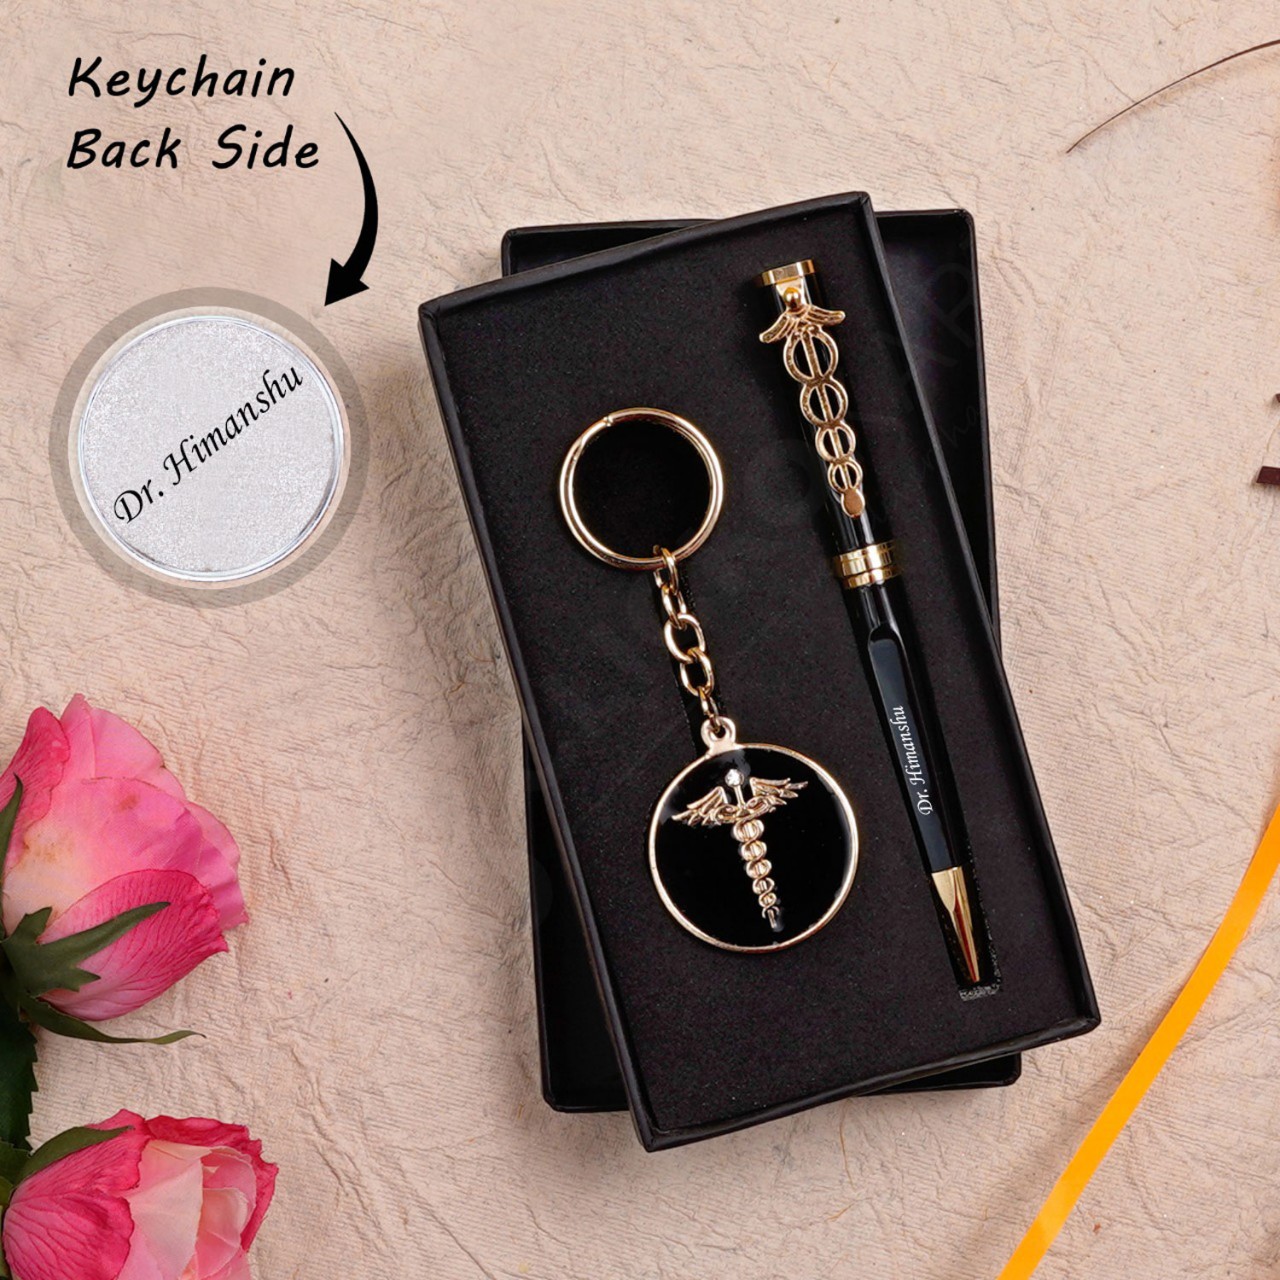 Personalized Metallic Key Chain And Pen Gift Set